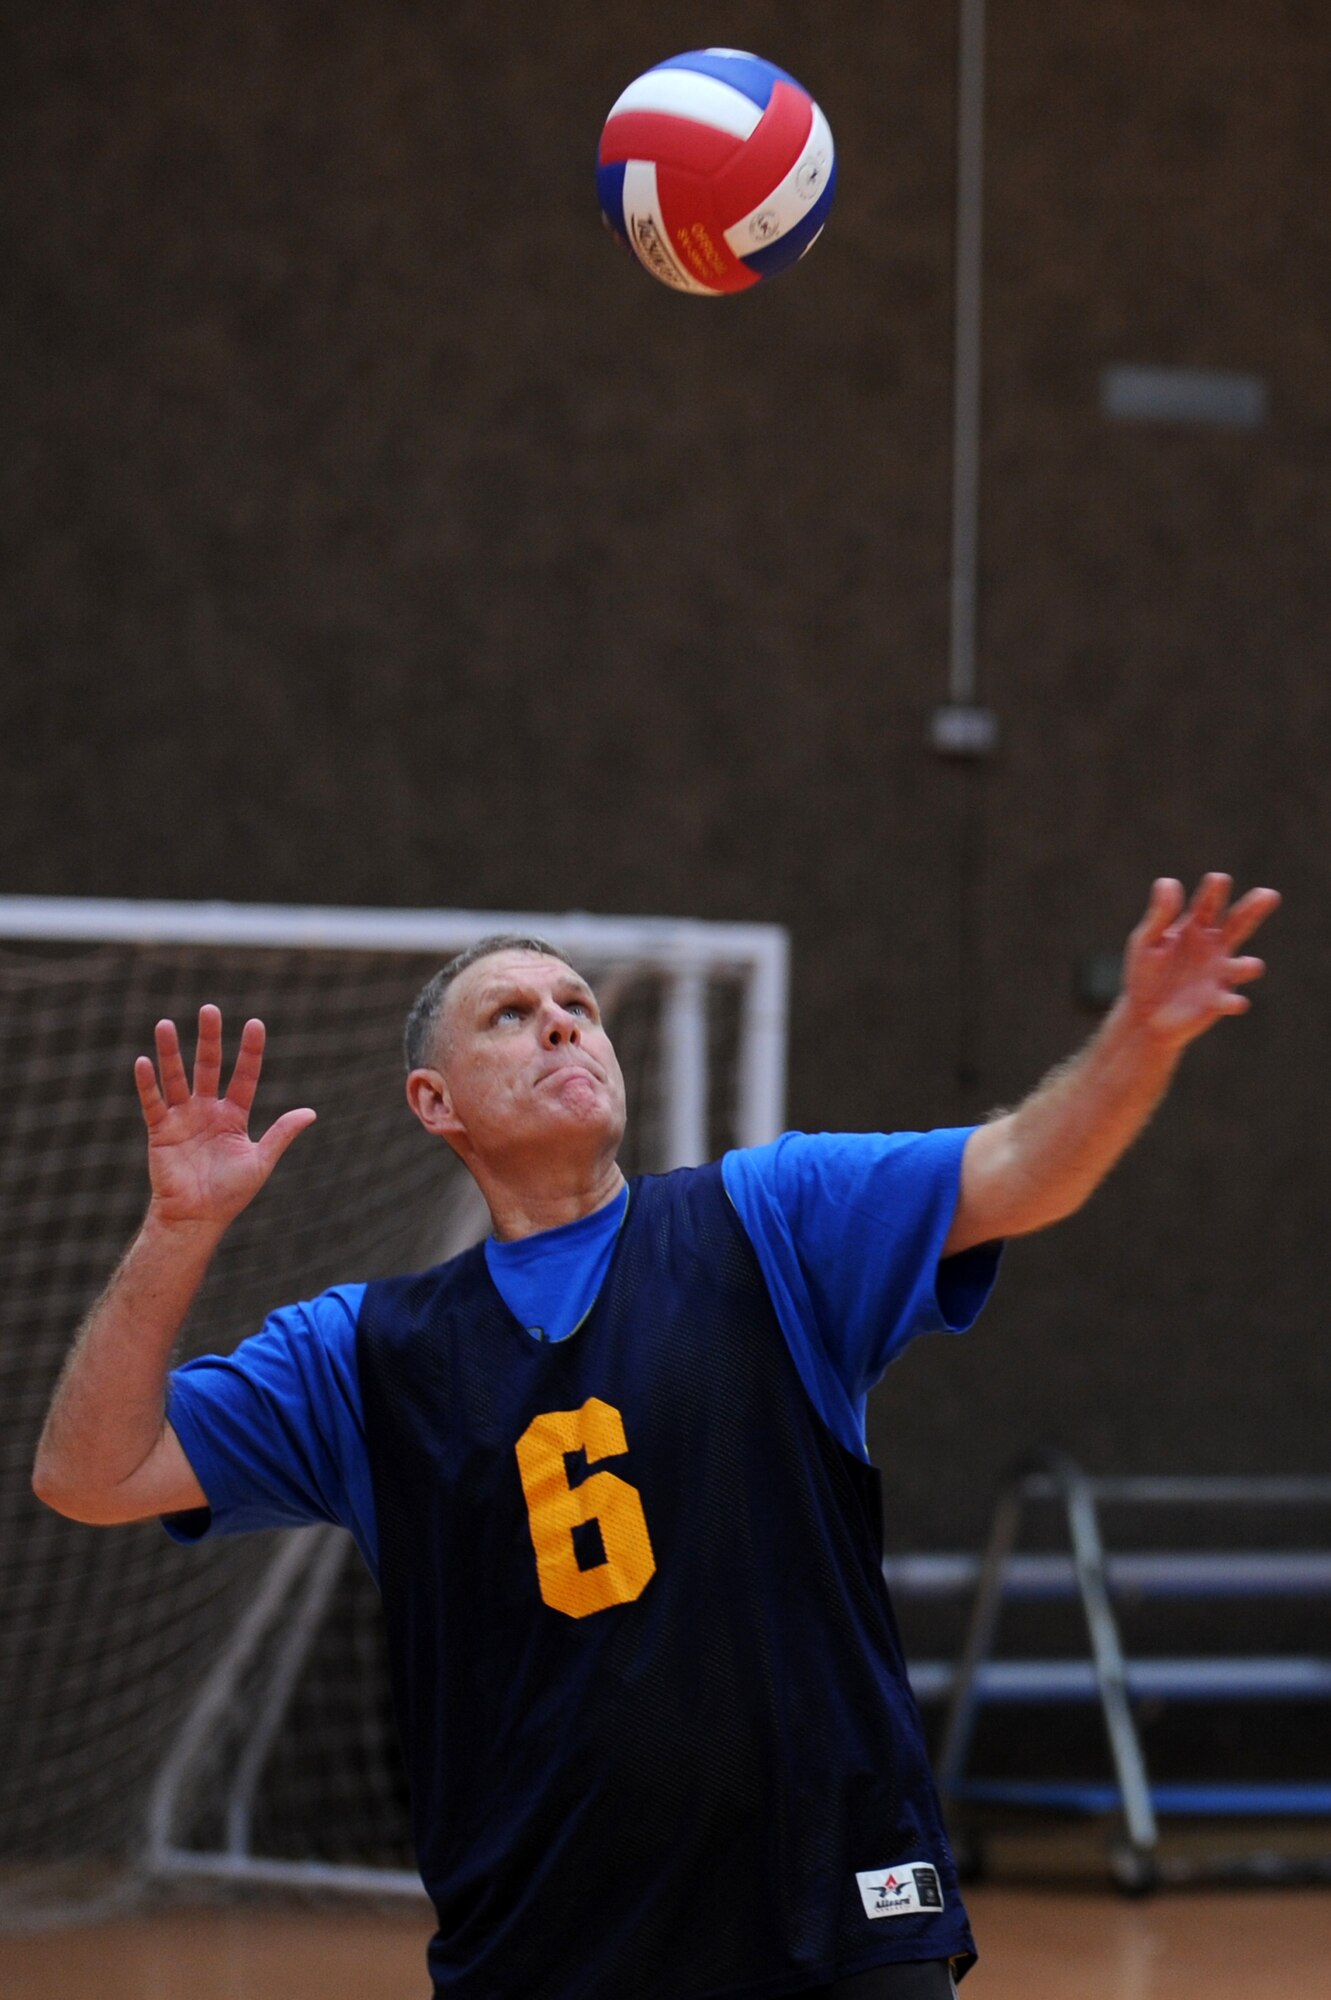 SPANGDAHLEM AIR BASE, Germany – Dennis Wilson, 606th Air Control Squadron, serves the volleyball during an intramural volleyball game against the 606th Air Control Squadron at the Skelton Memorial Fitness Center here Feb. 15. FSS defeated ACS in two sets, 25-16 and 26-24.  This match kicked off the intramural volleyball season, and games will be played Monday – Thursday beginning at 6:30 p.m. at the fitness center. (U.S. Air Force photo by Airman 1st Class Matthew B. Fredericks/Released)